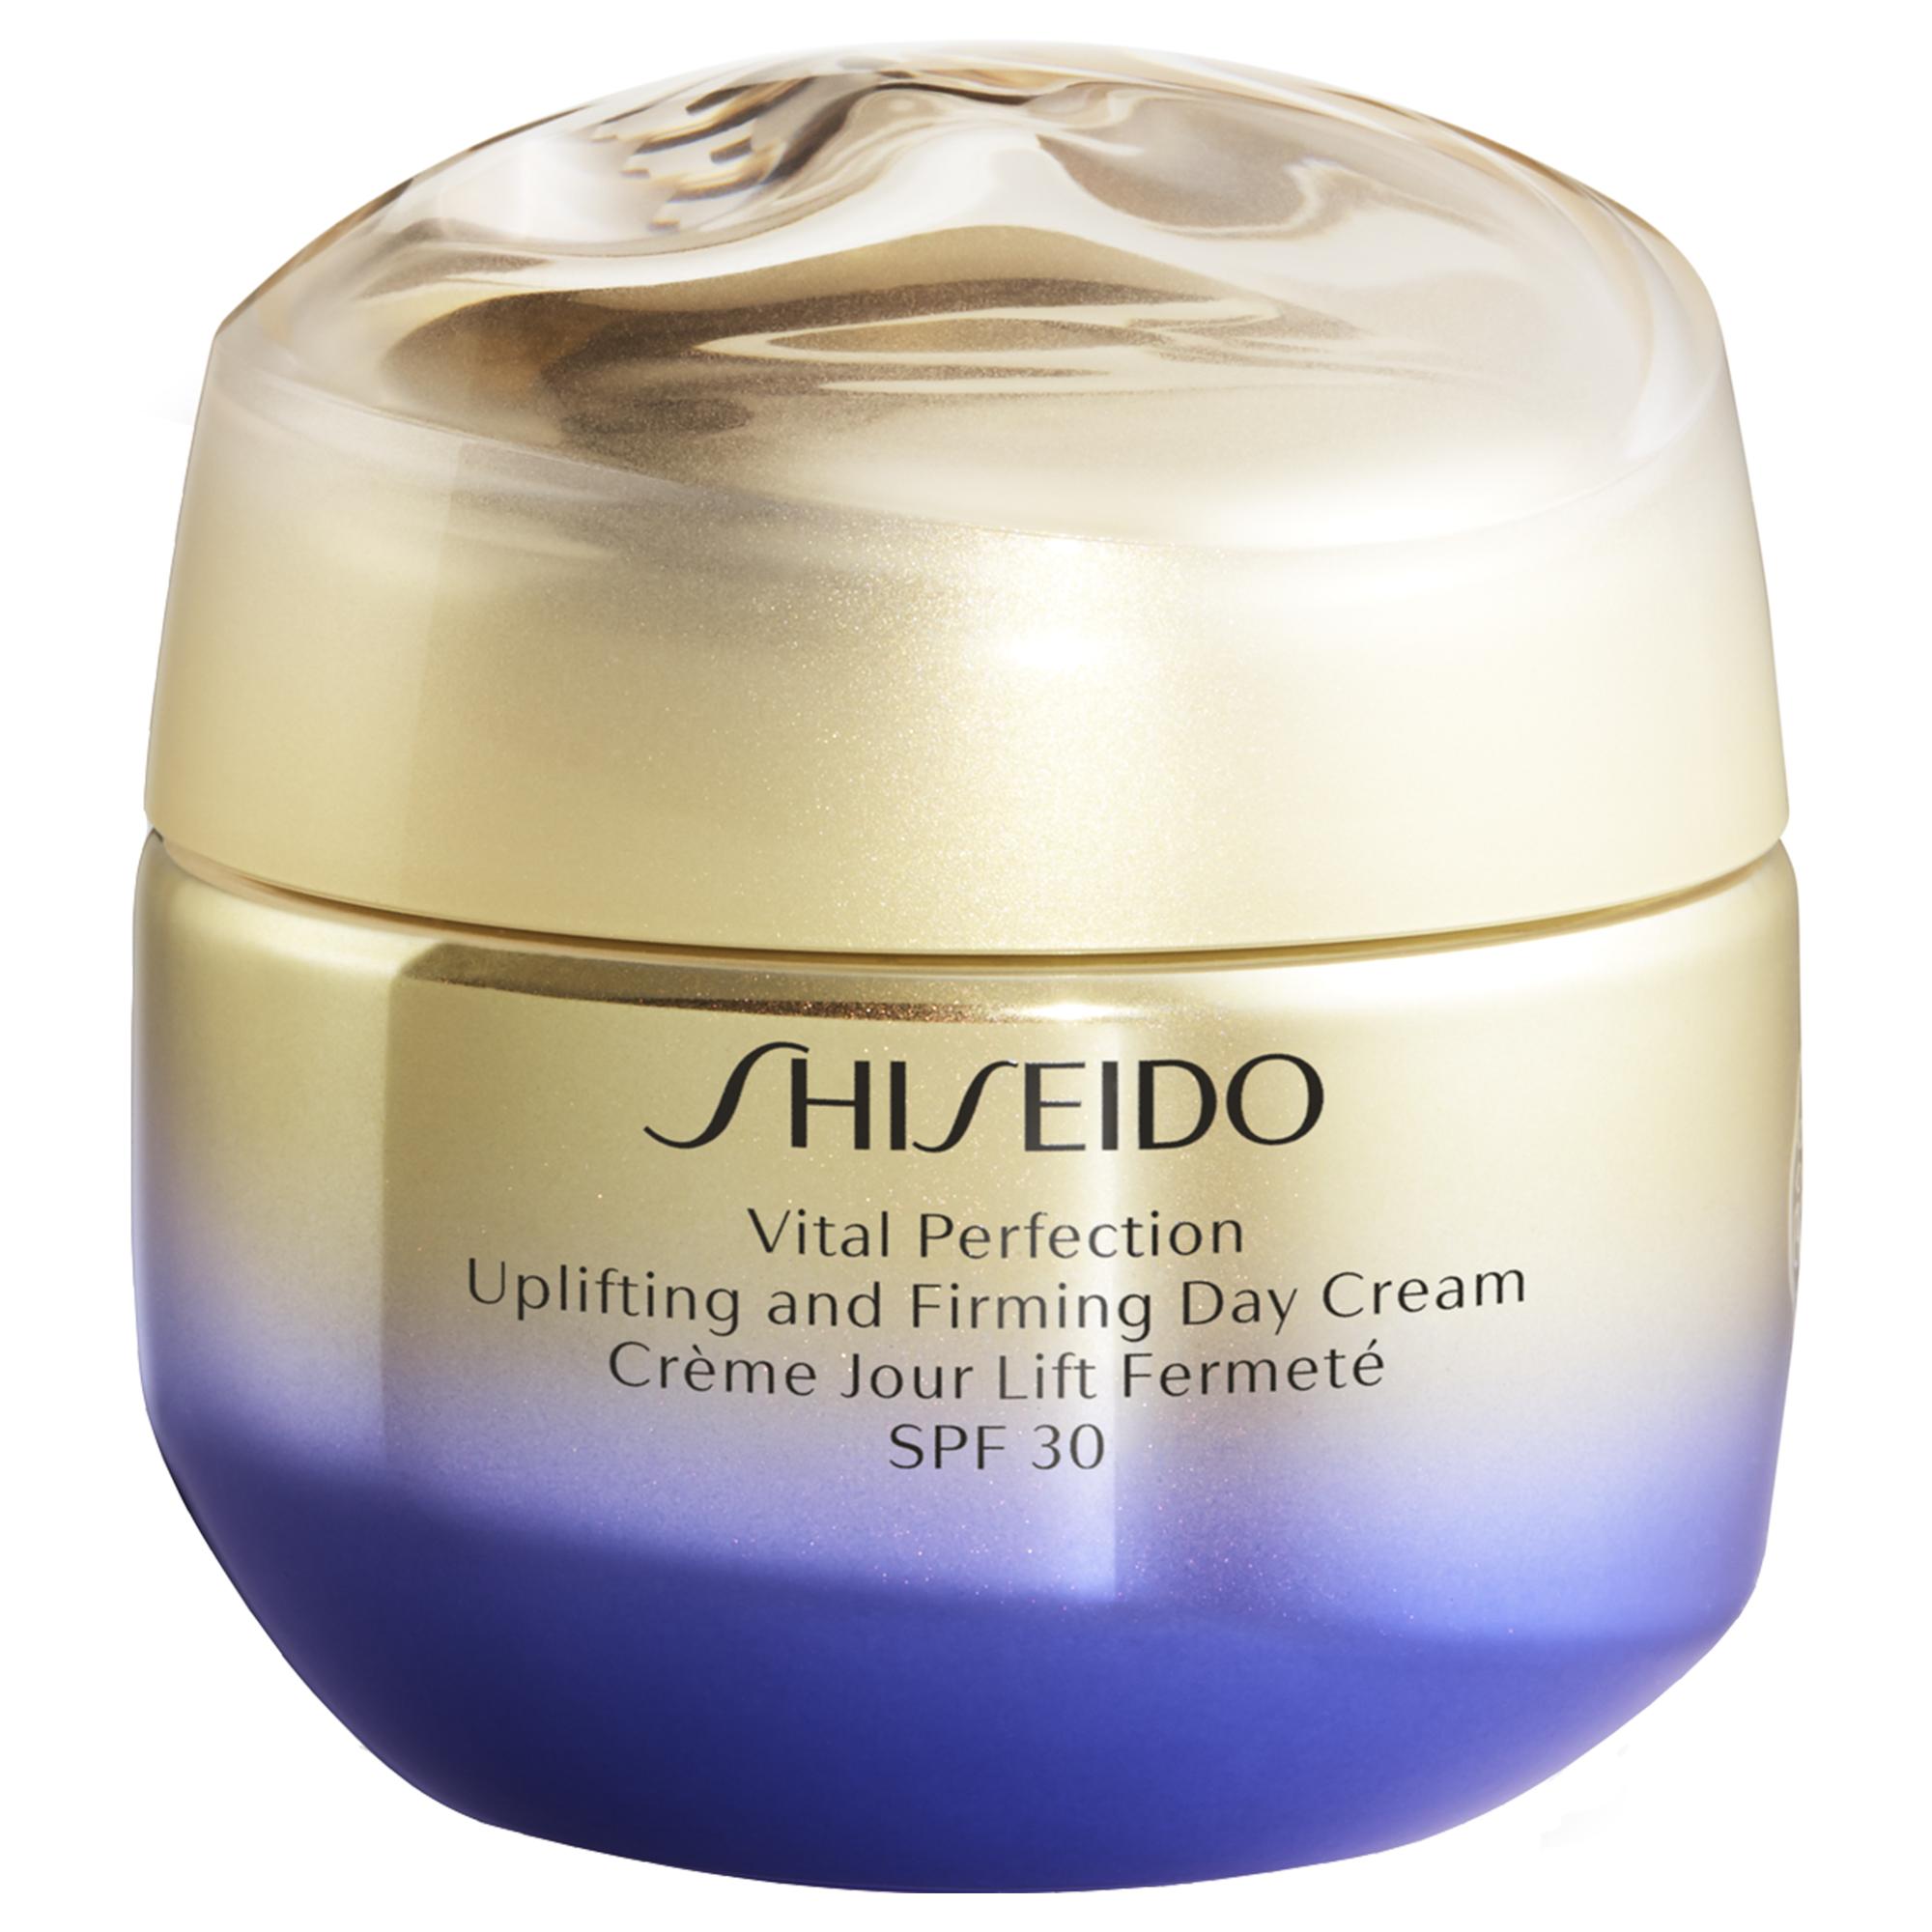 Shiseido Vital Perfection Uplifting and Firming Day Cream SPF30  50 ml